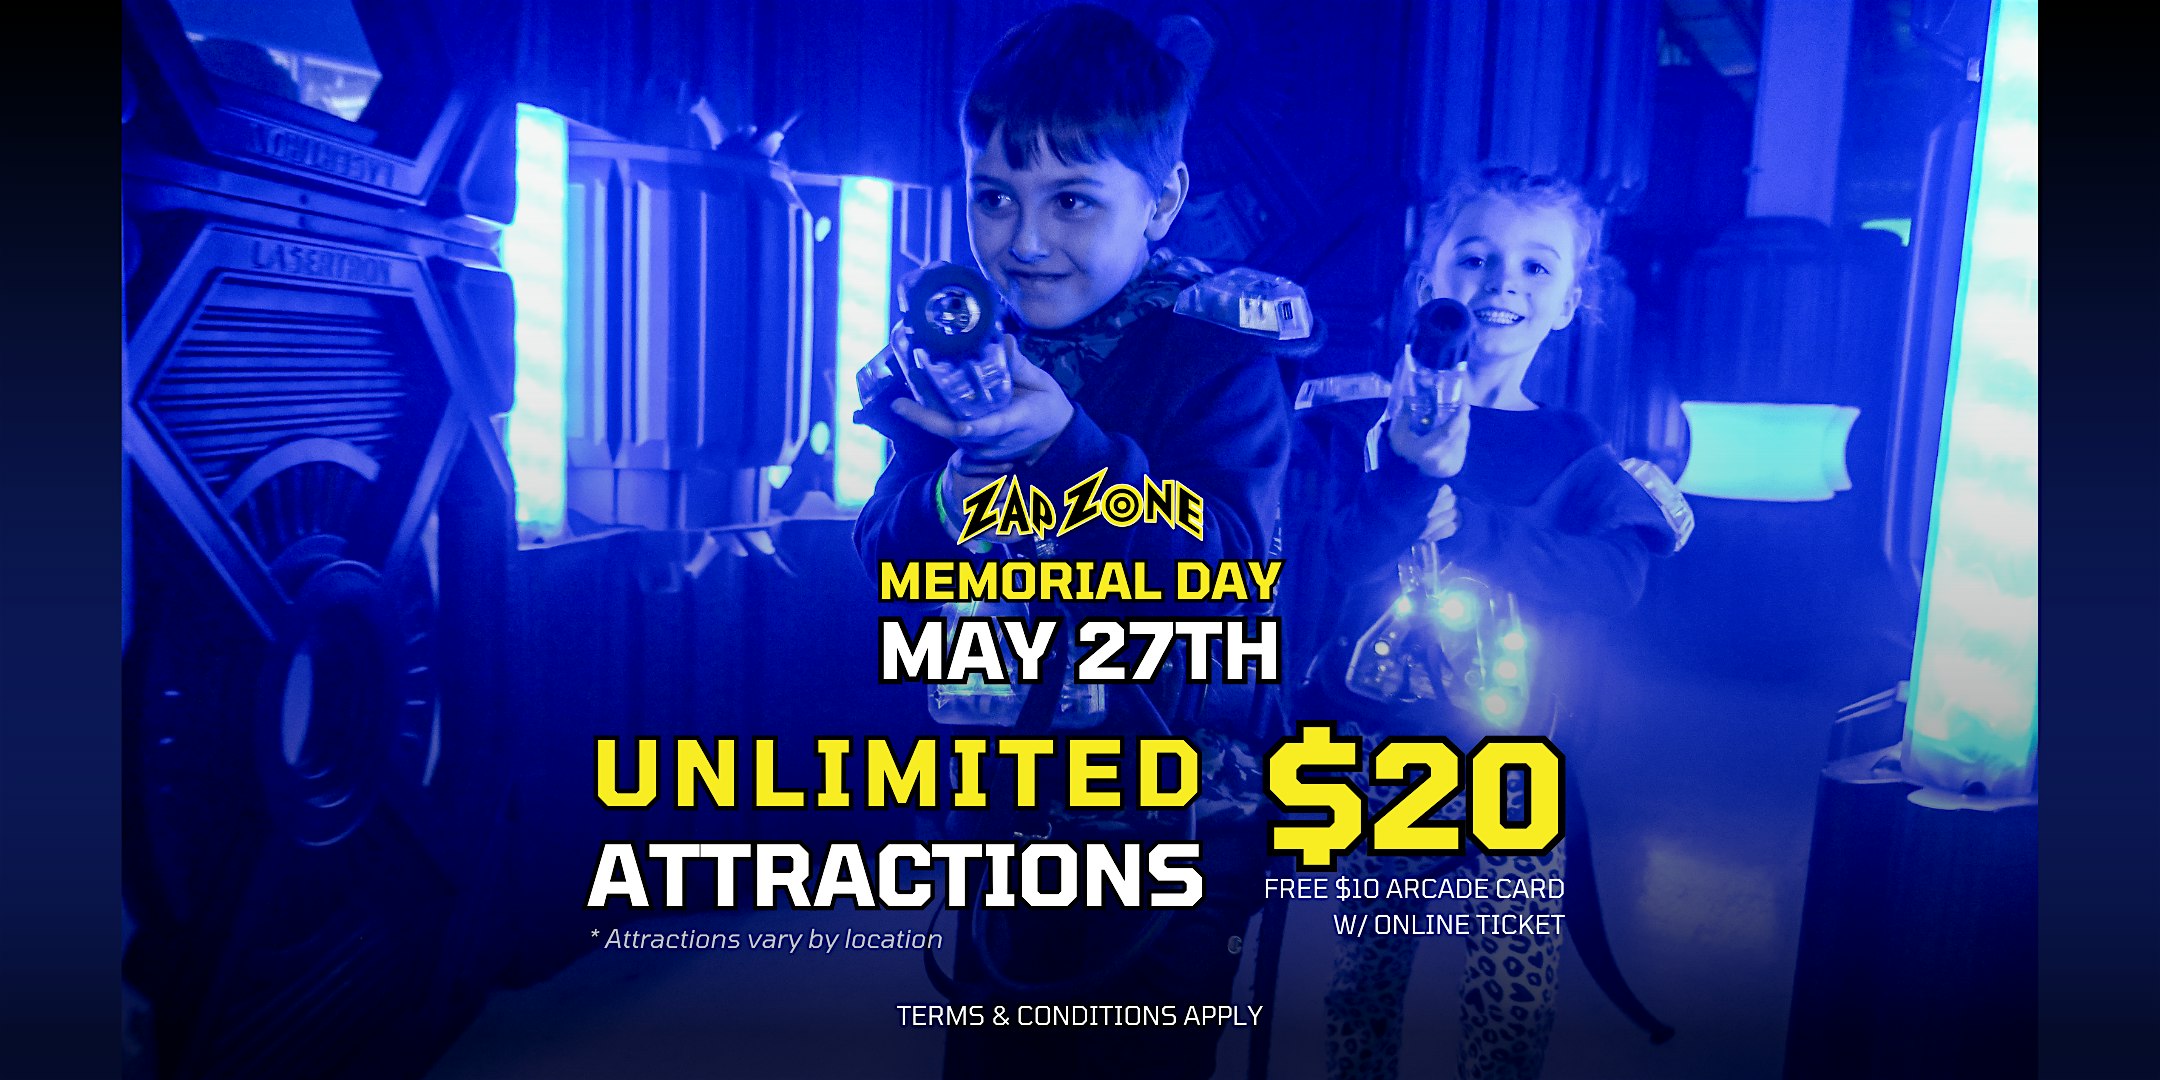 Memorial Day | Zap Zone Sterling Heights